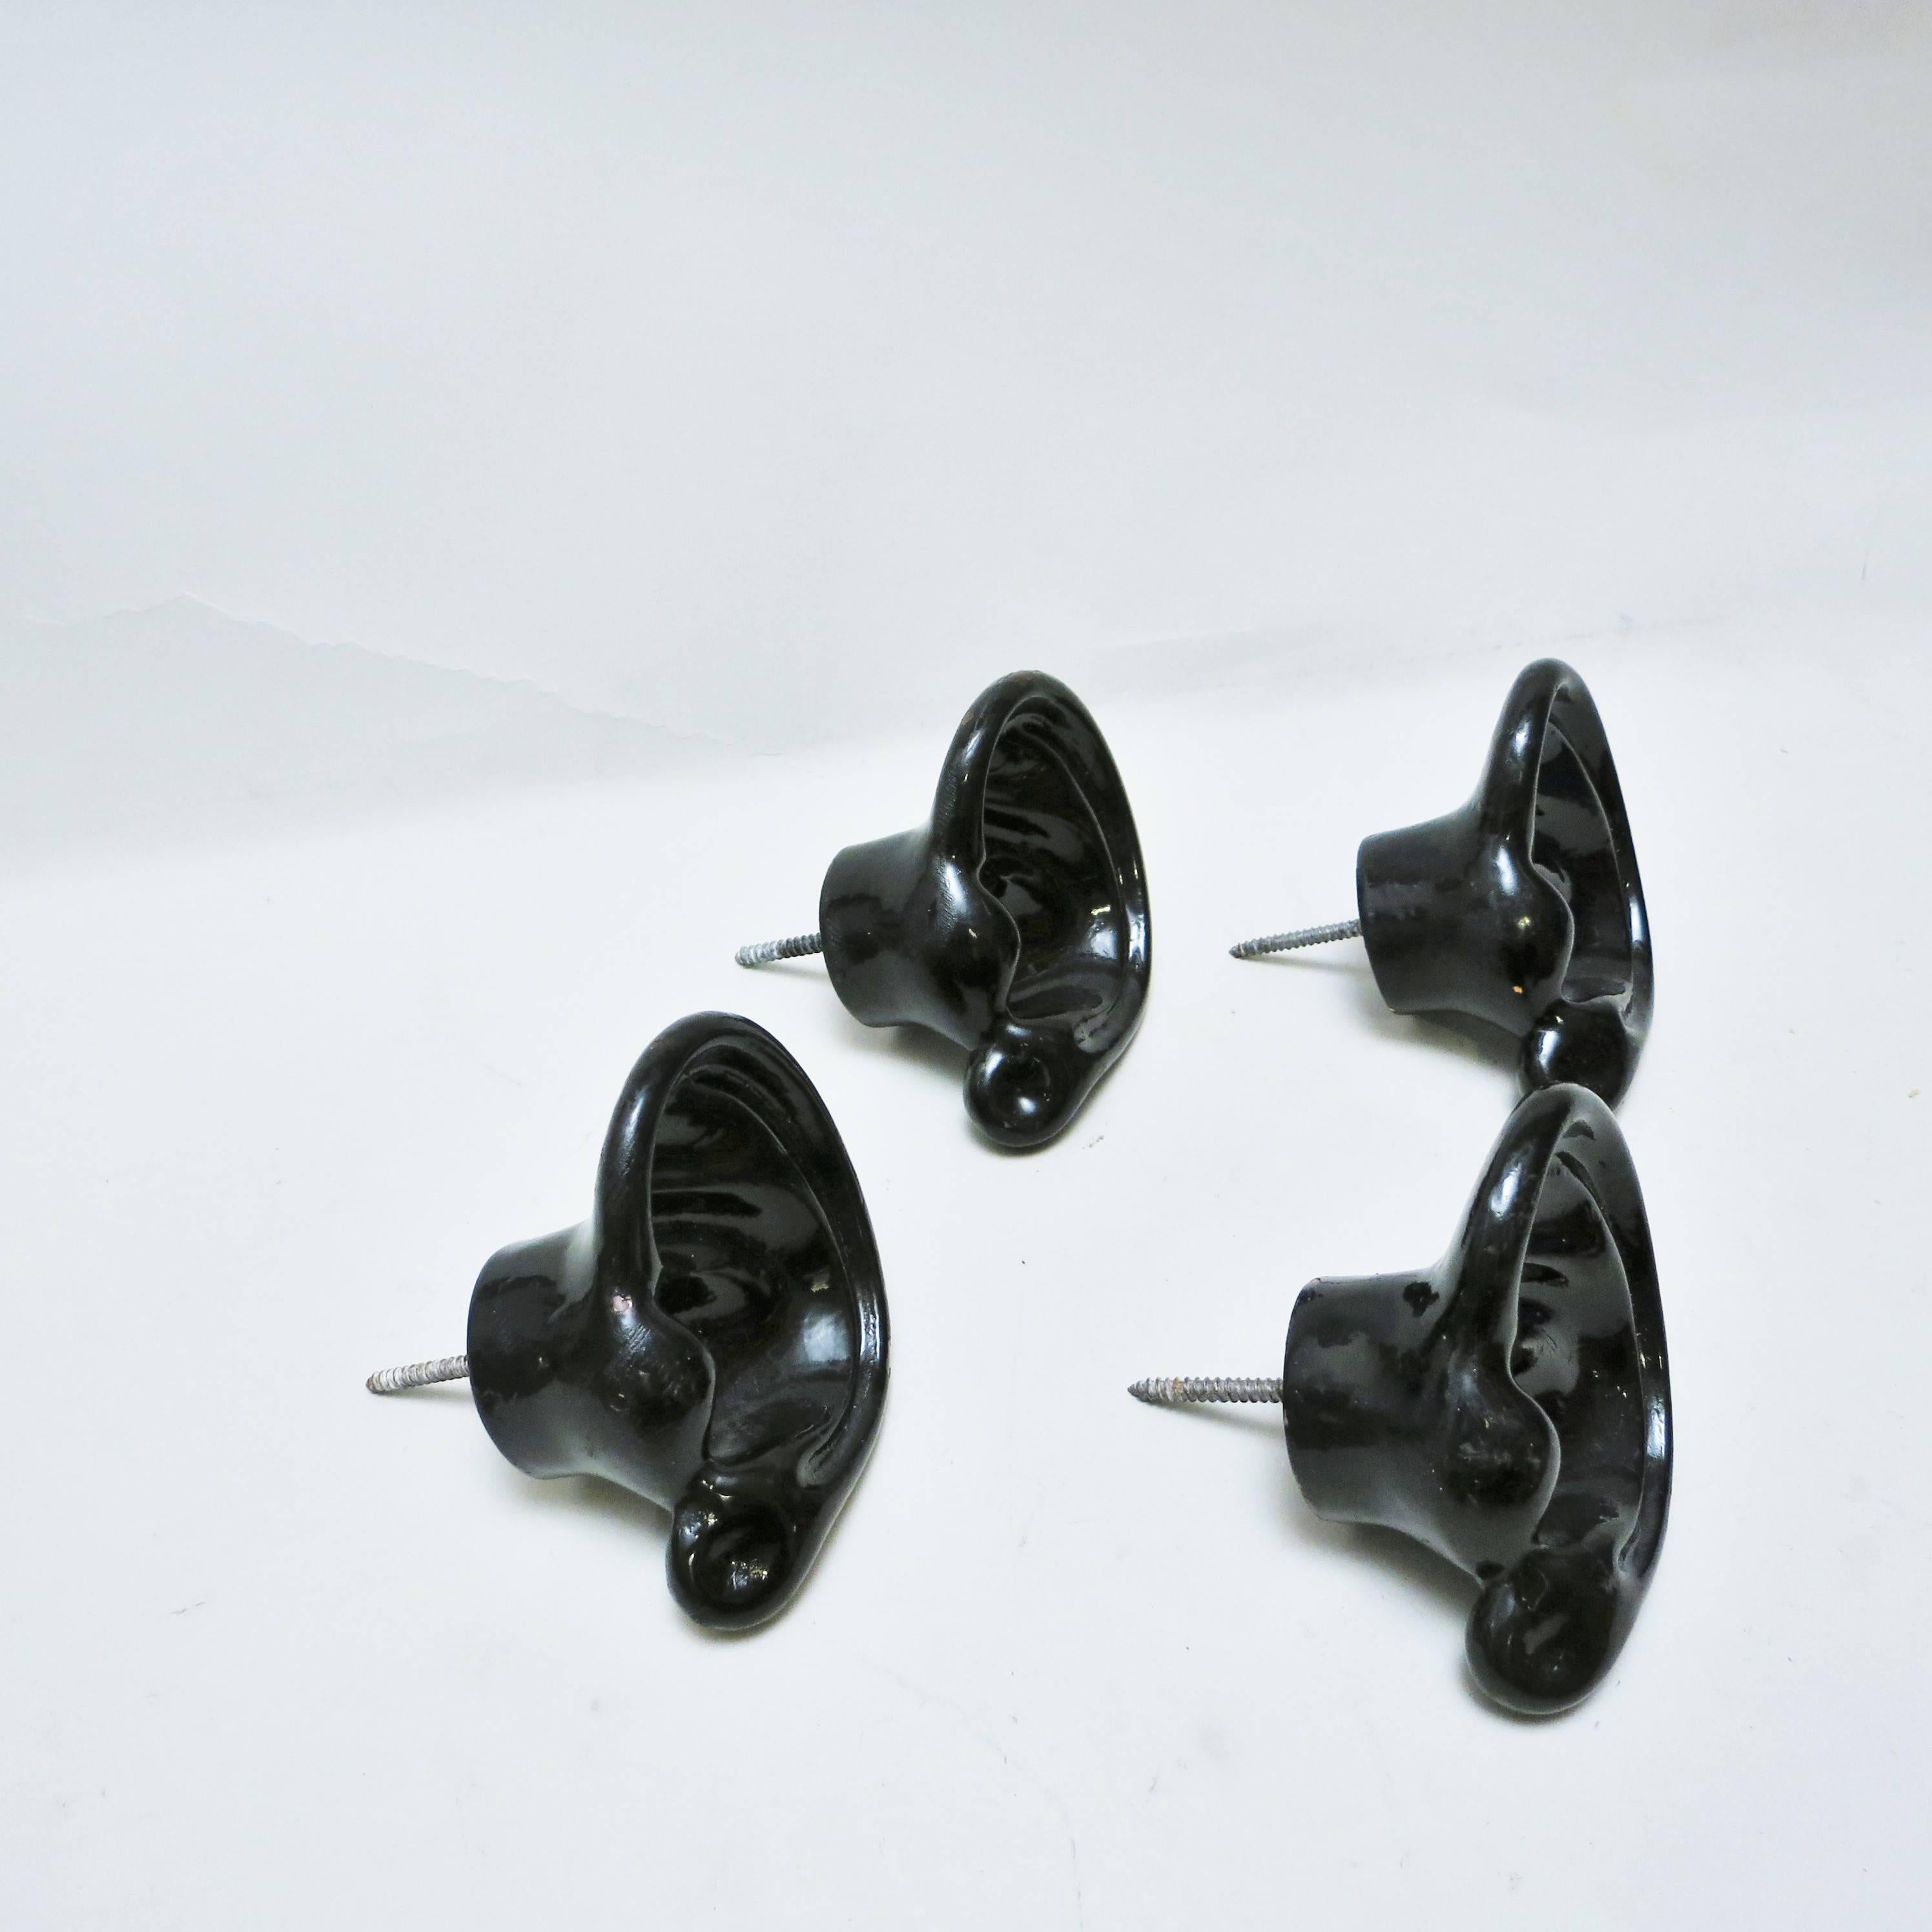 Set of 4 coat hangers Black ears made of resin lacquered in black circa 1970